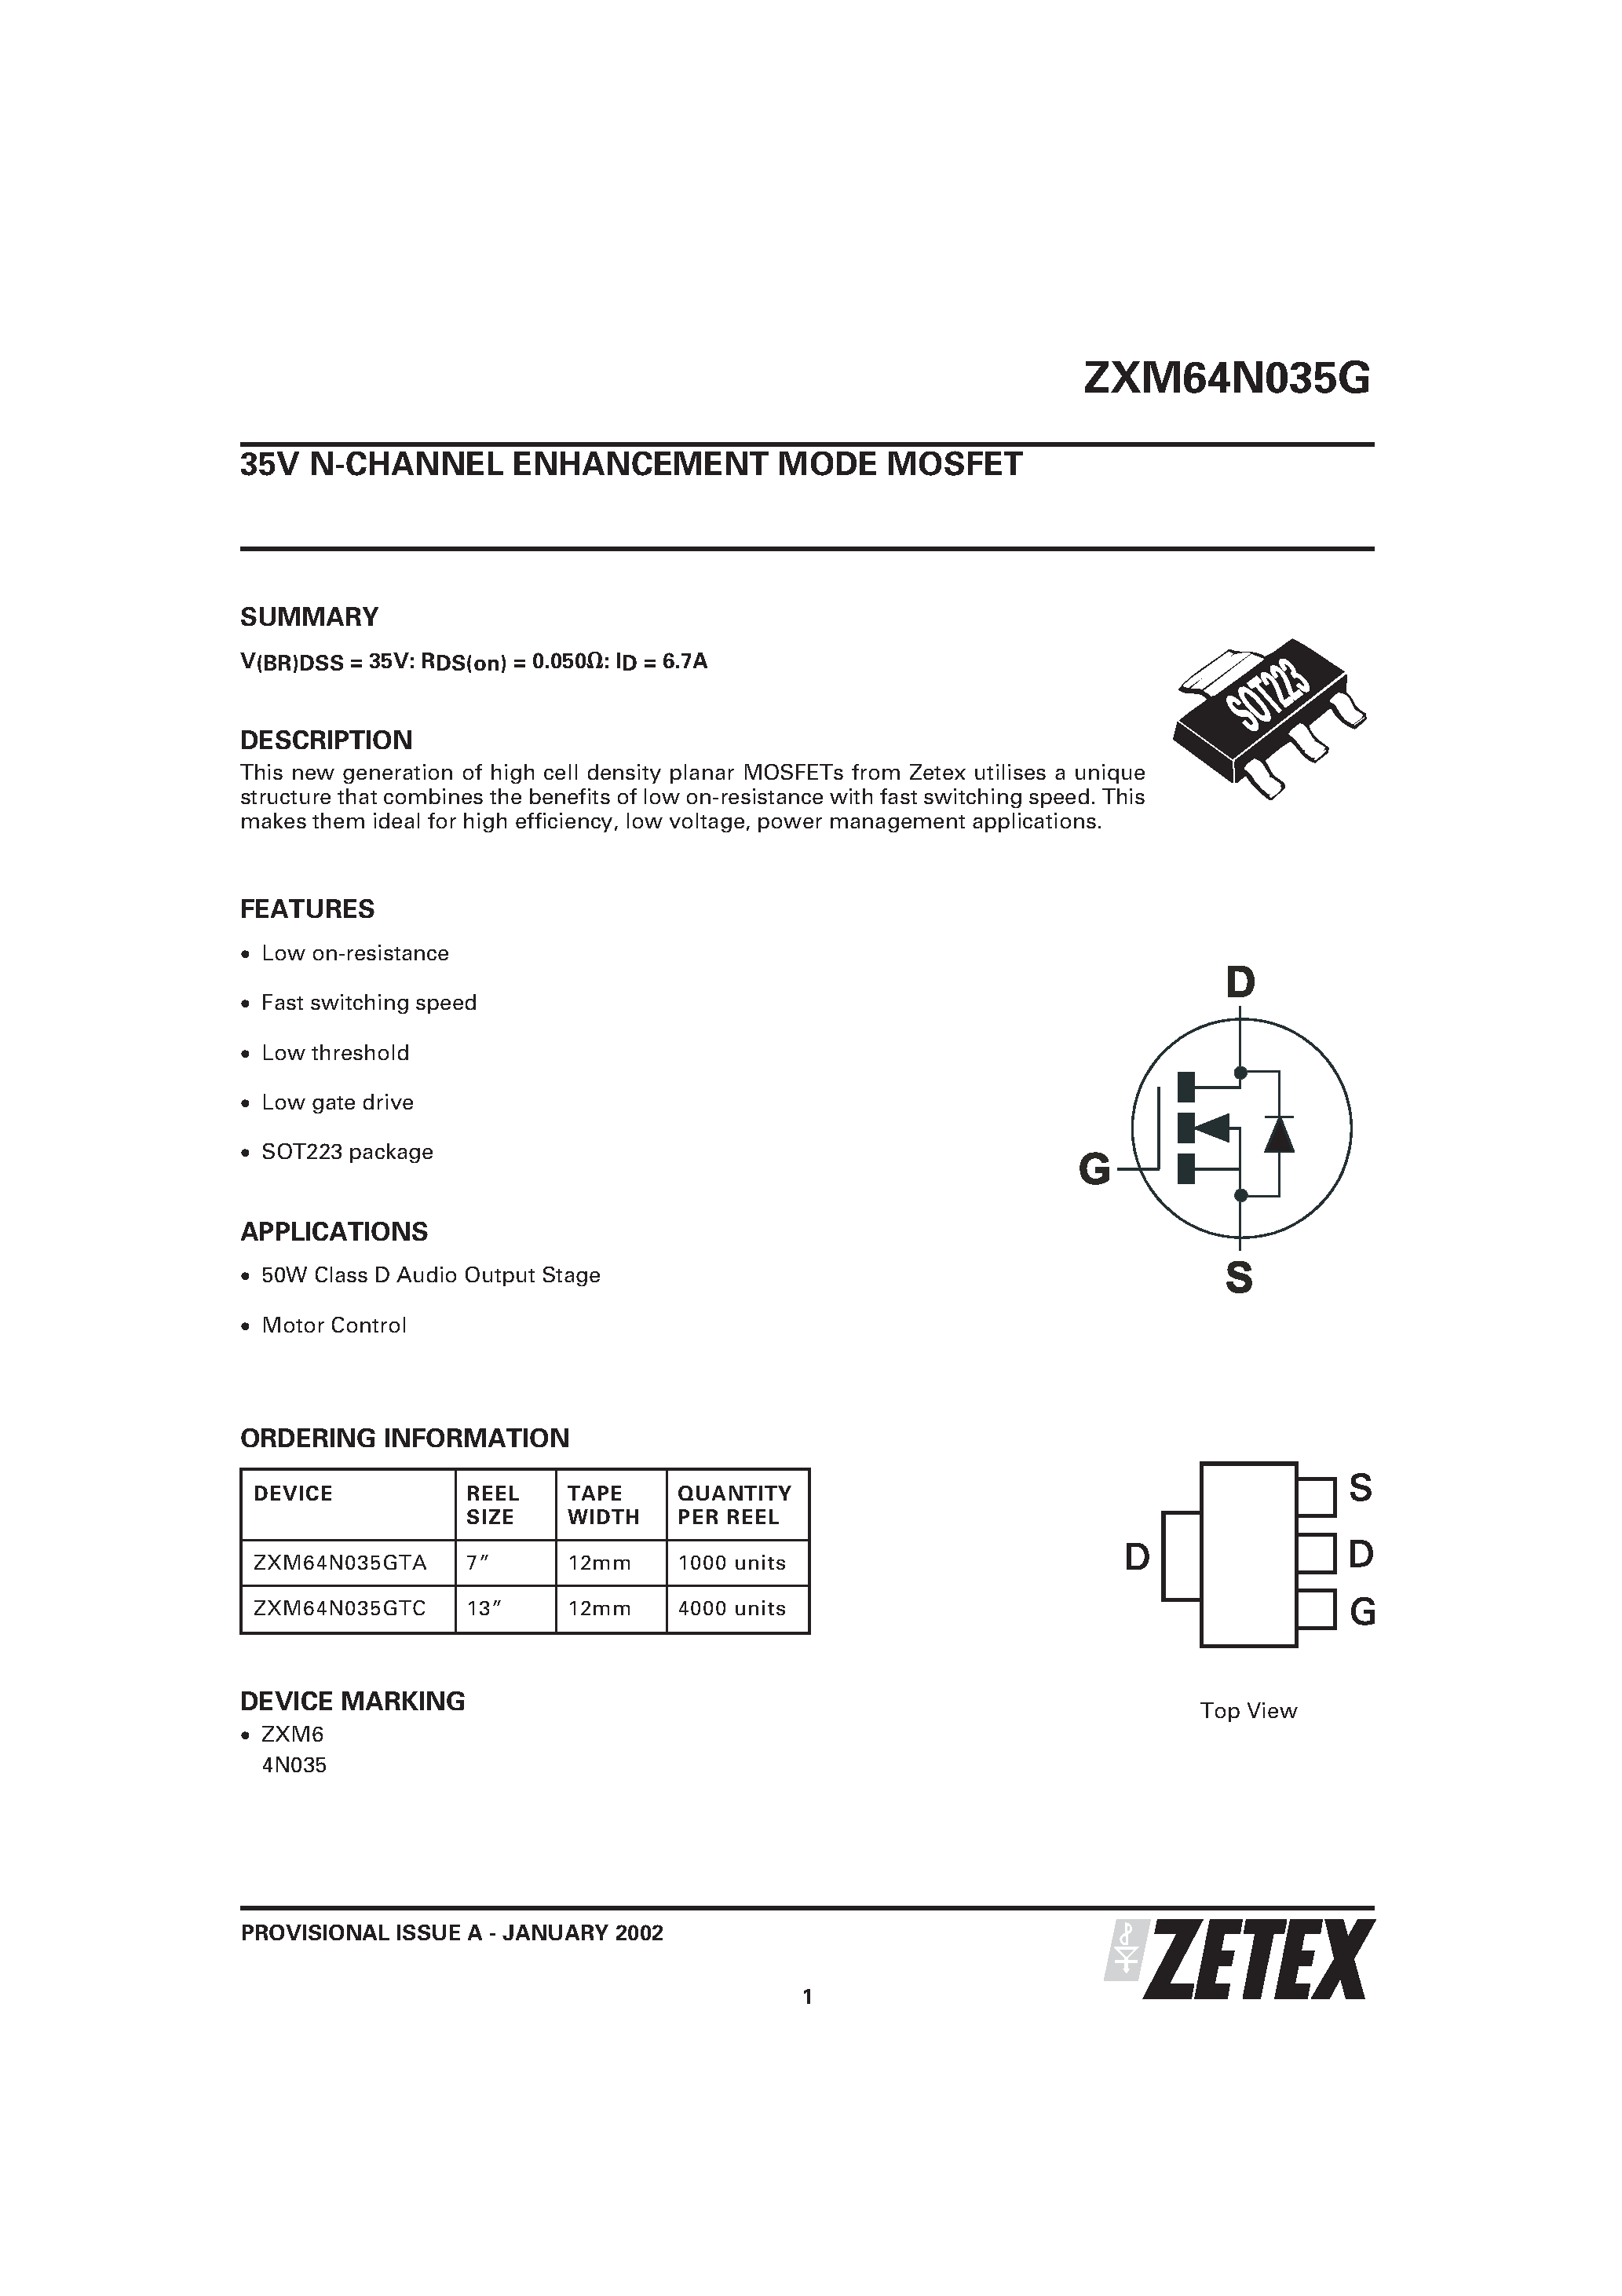 Datasheet ZXM64N035G - 35V N-CHANNEL ENHANCEMENT MODE MOSFET page 1